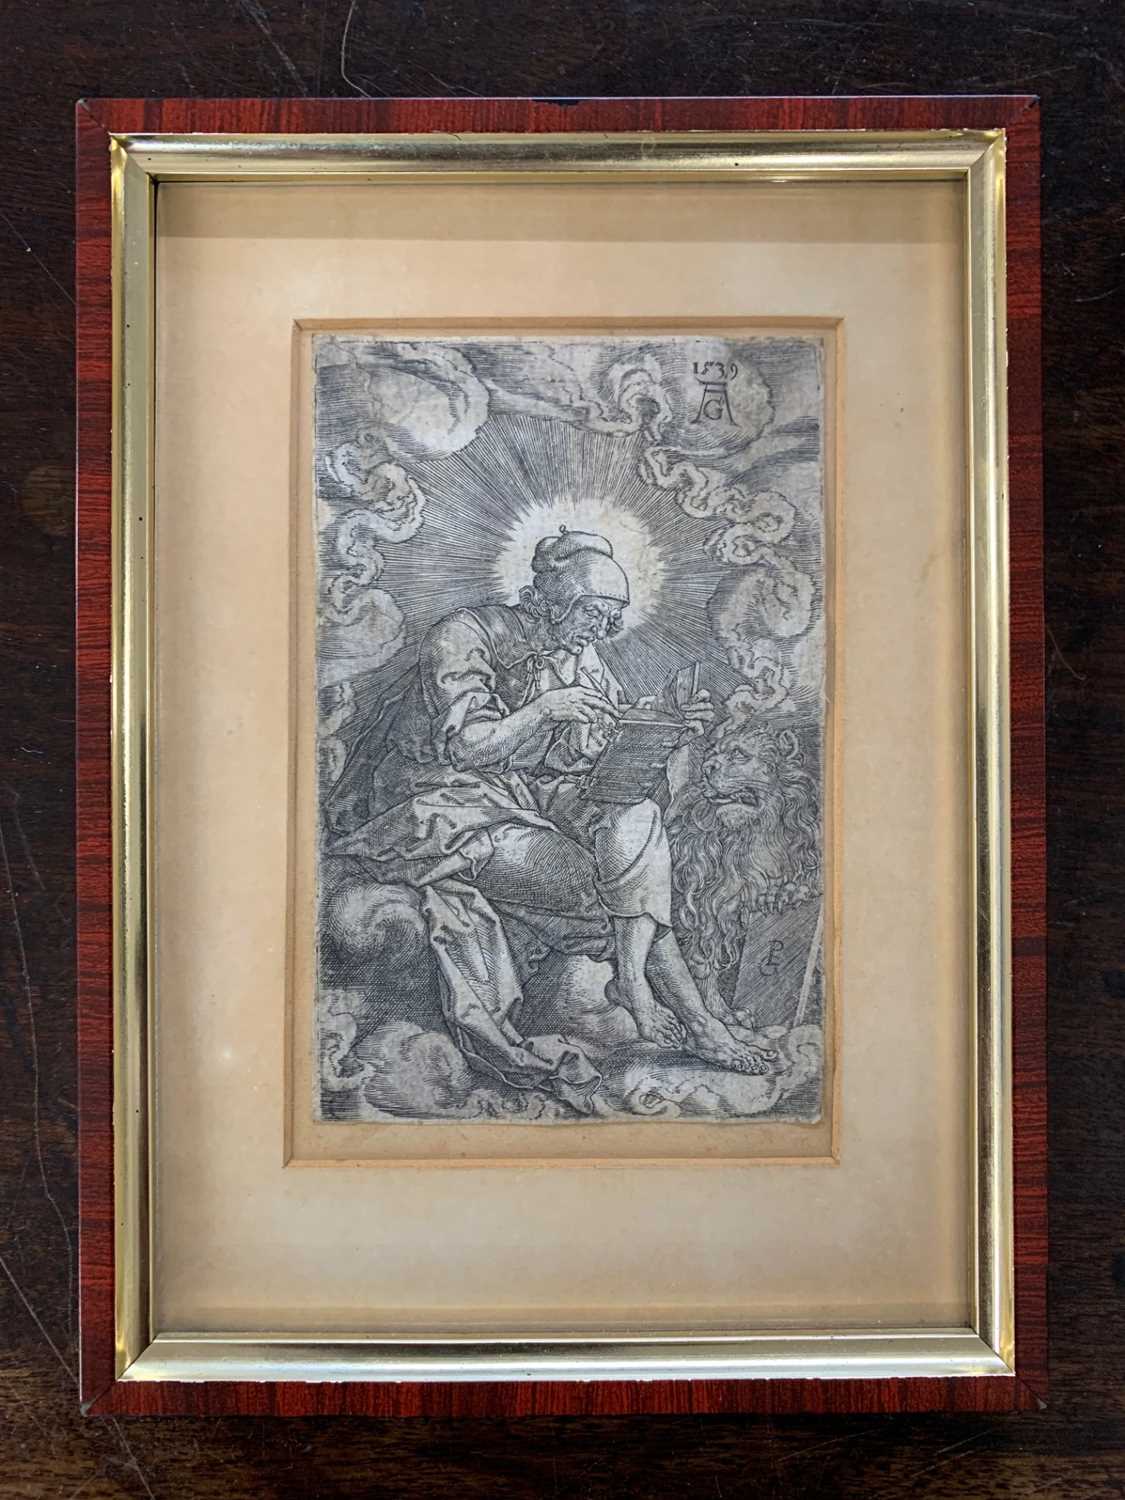 Georg Pencz (German, 1500-1550), engraving, initialed, dated 1539, laid on board, 8x12cm, framed and